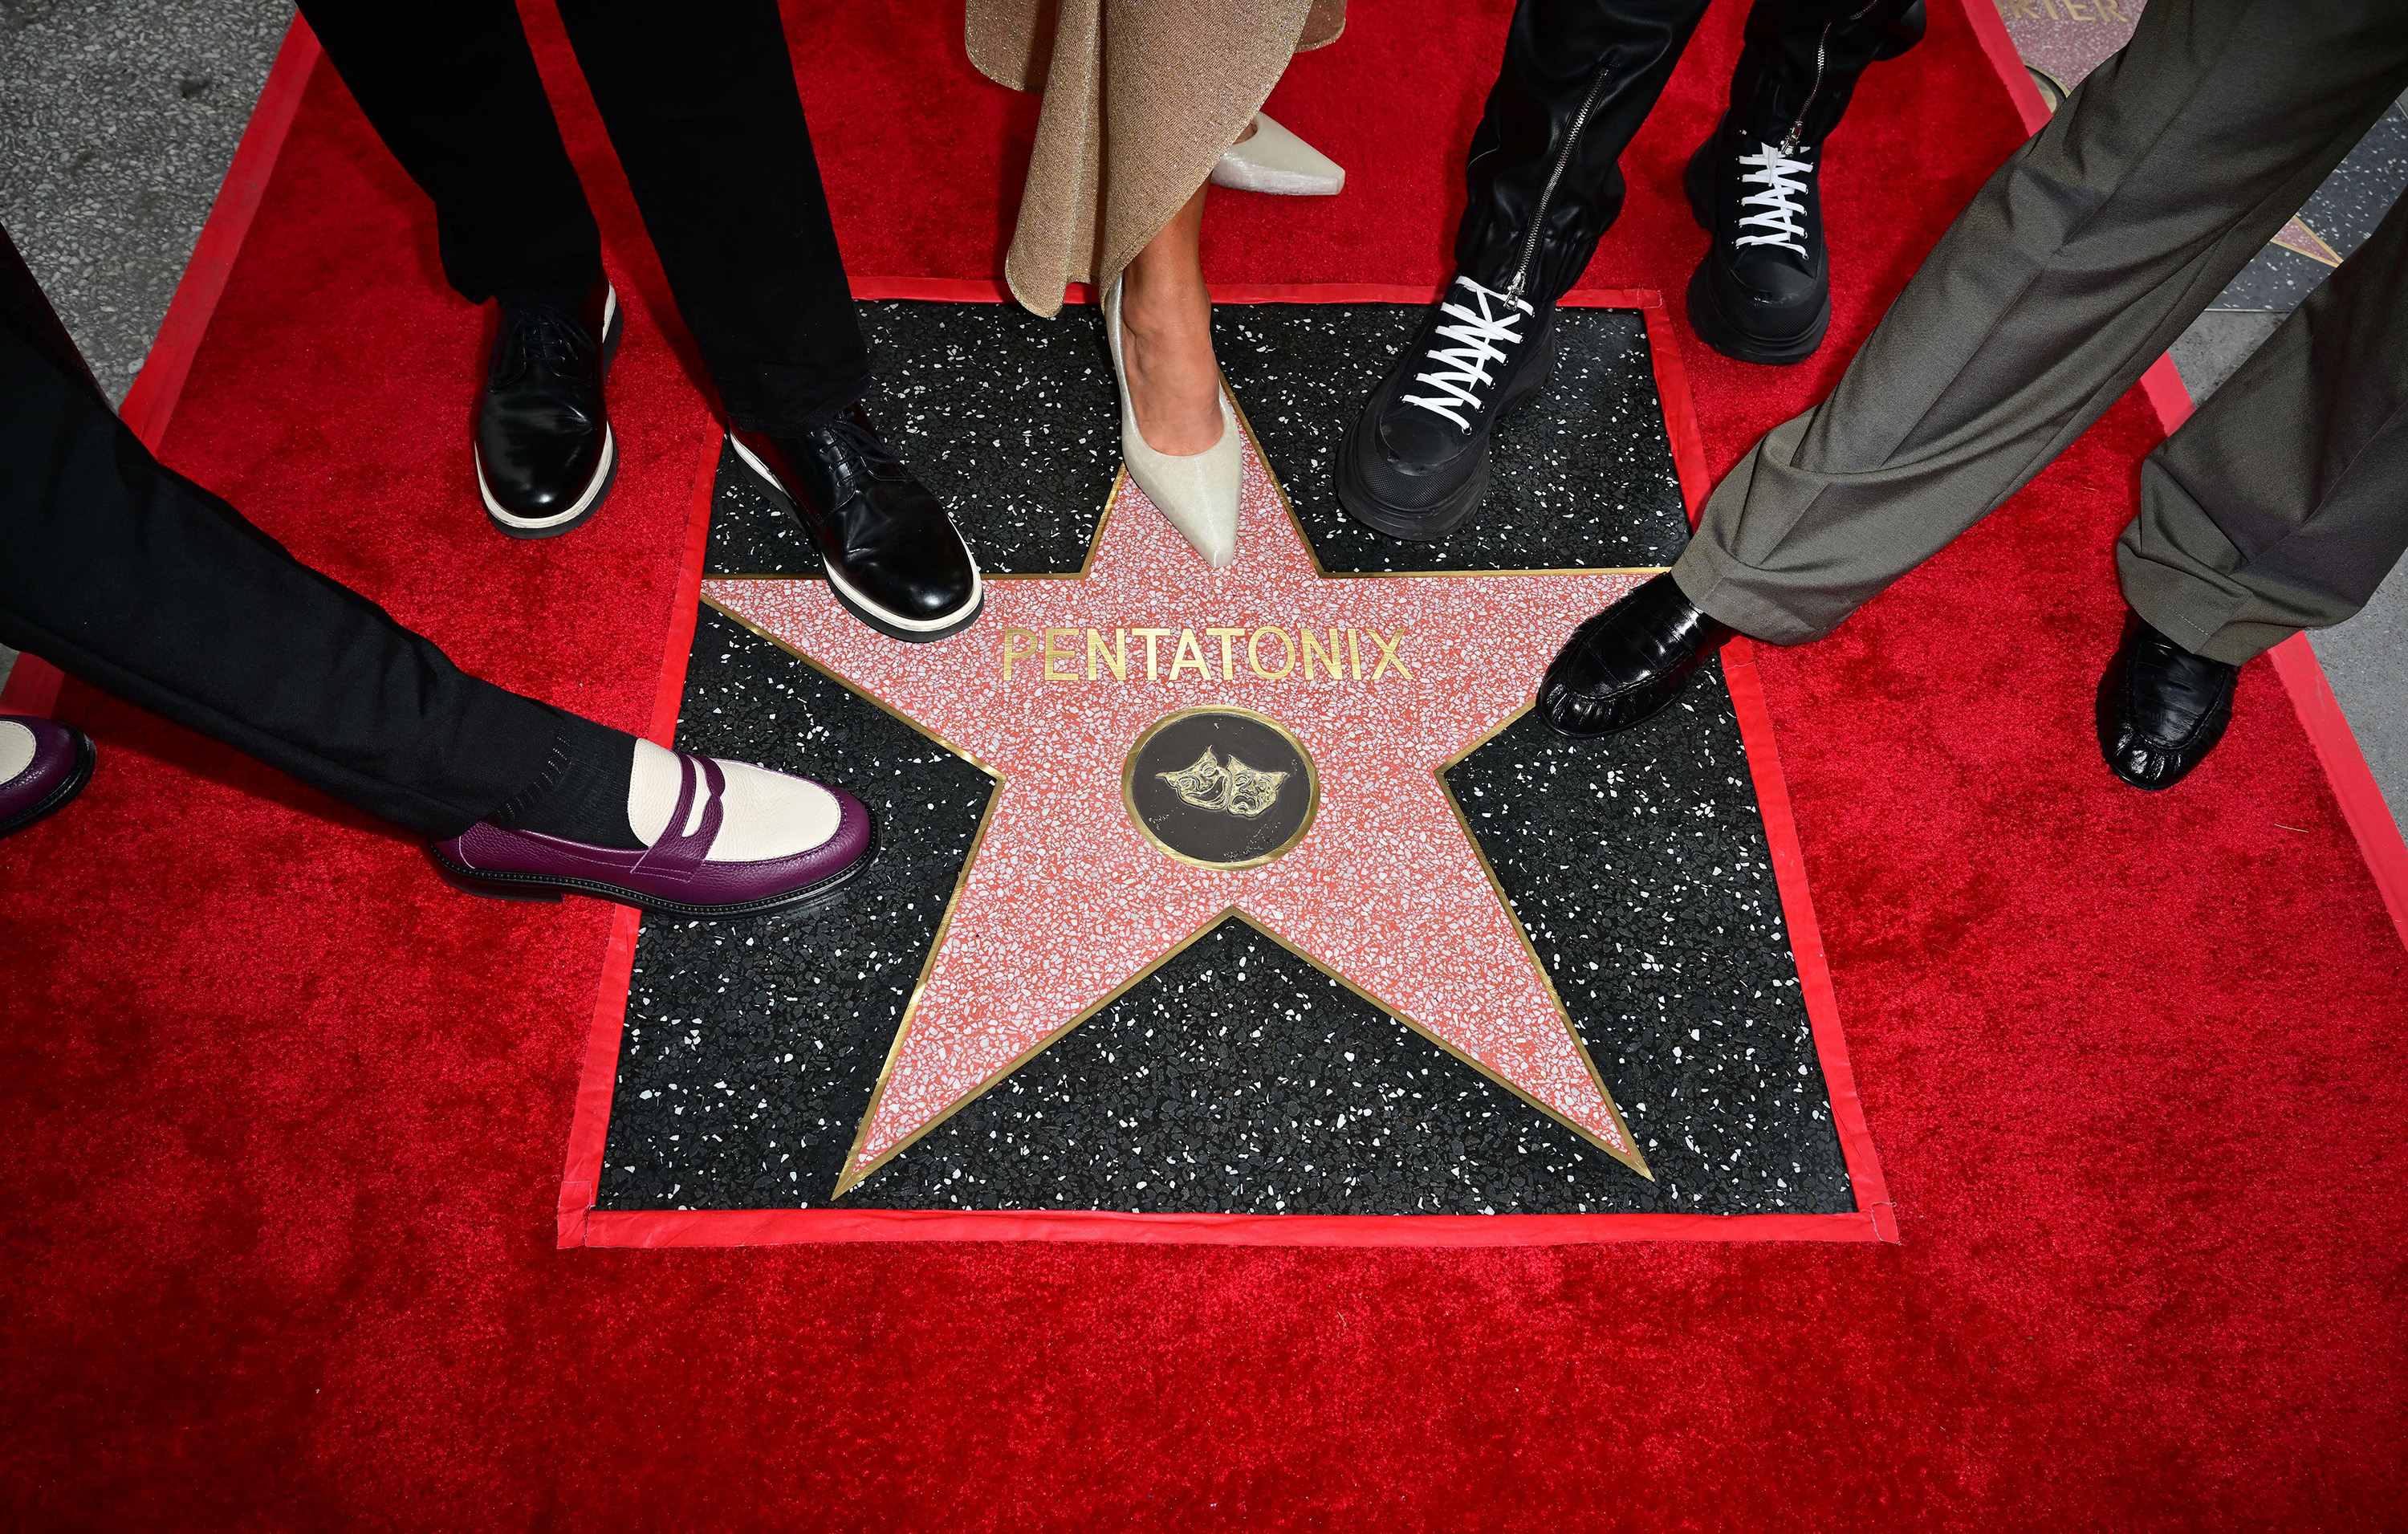 Members of the a cappella group Pentatonix pose for a photo with their newly unveiled Hollywood Walk of Fame star during a ceremony on Feb. 21, 2023, in Hollywood, Calif.